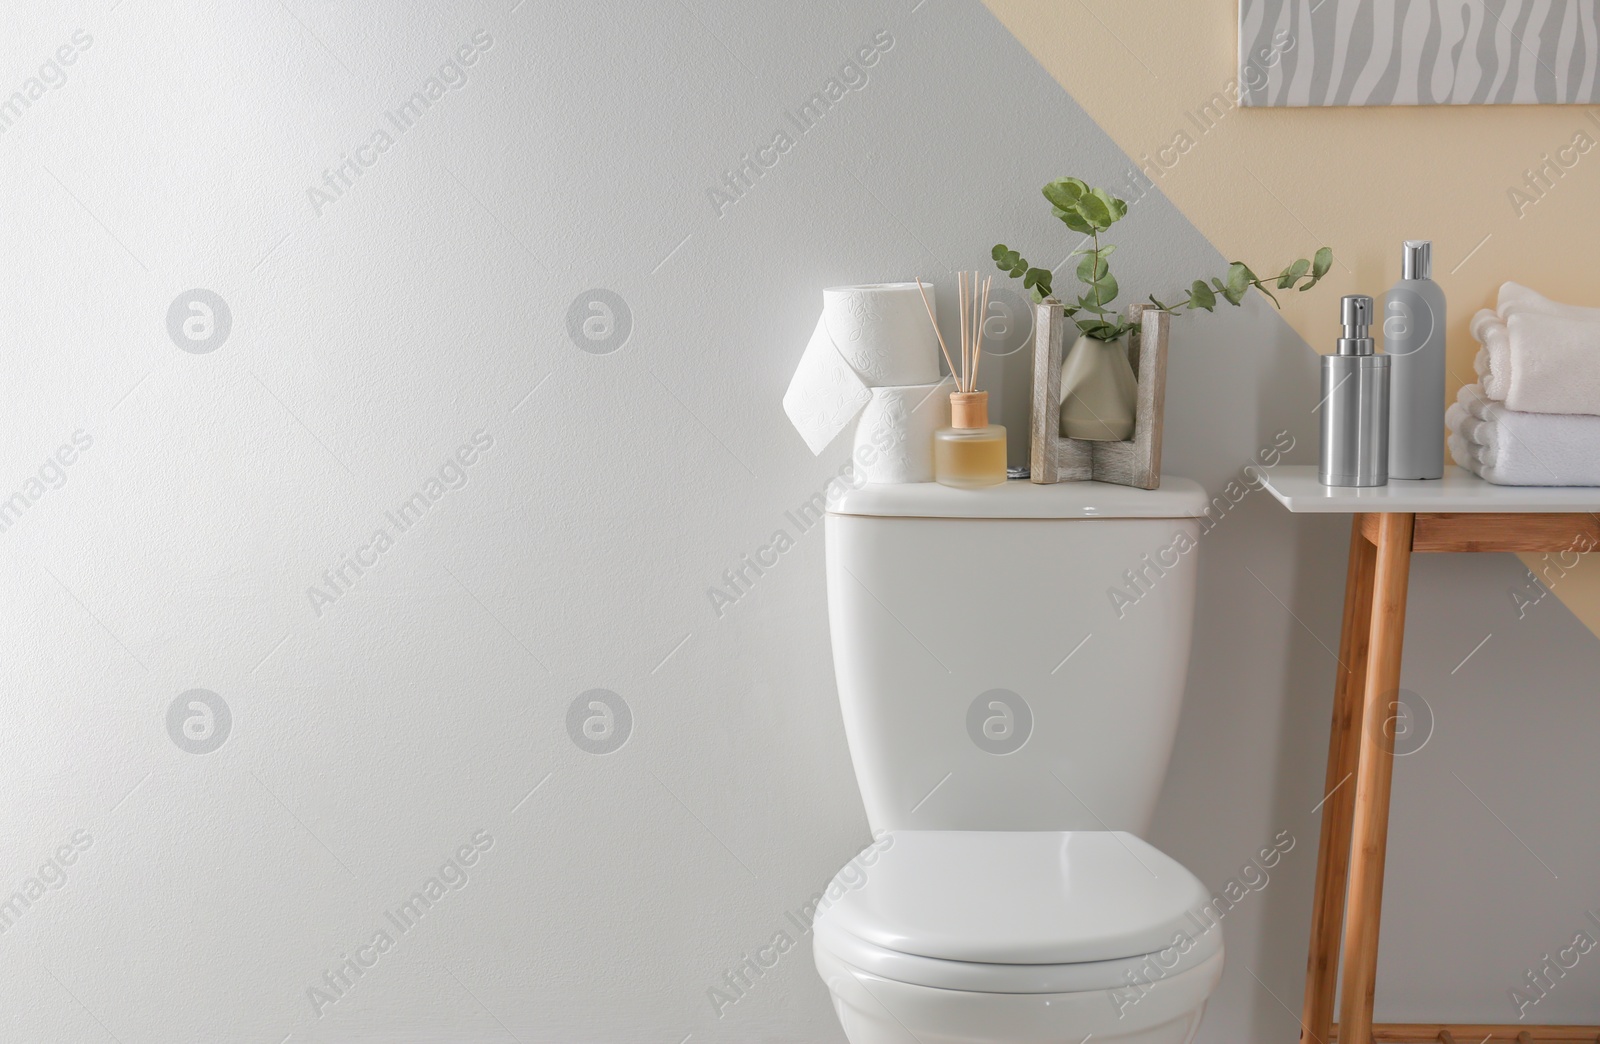 Photo of Table and toilet bowl with decor elements and necessities near color wall. Bathroom interior